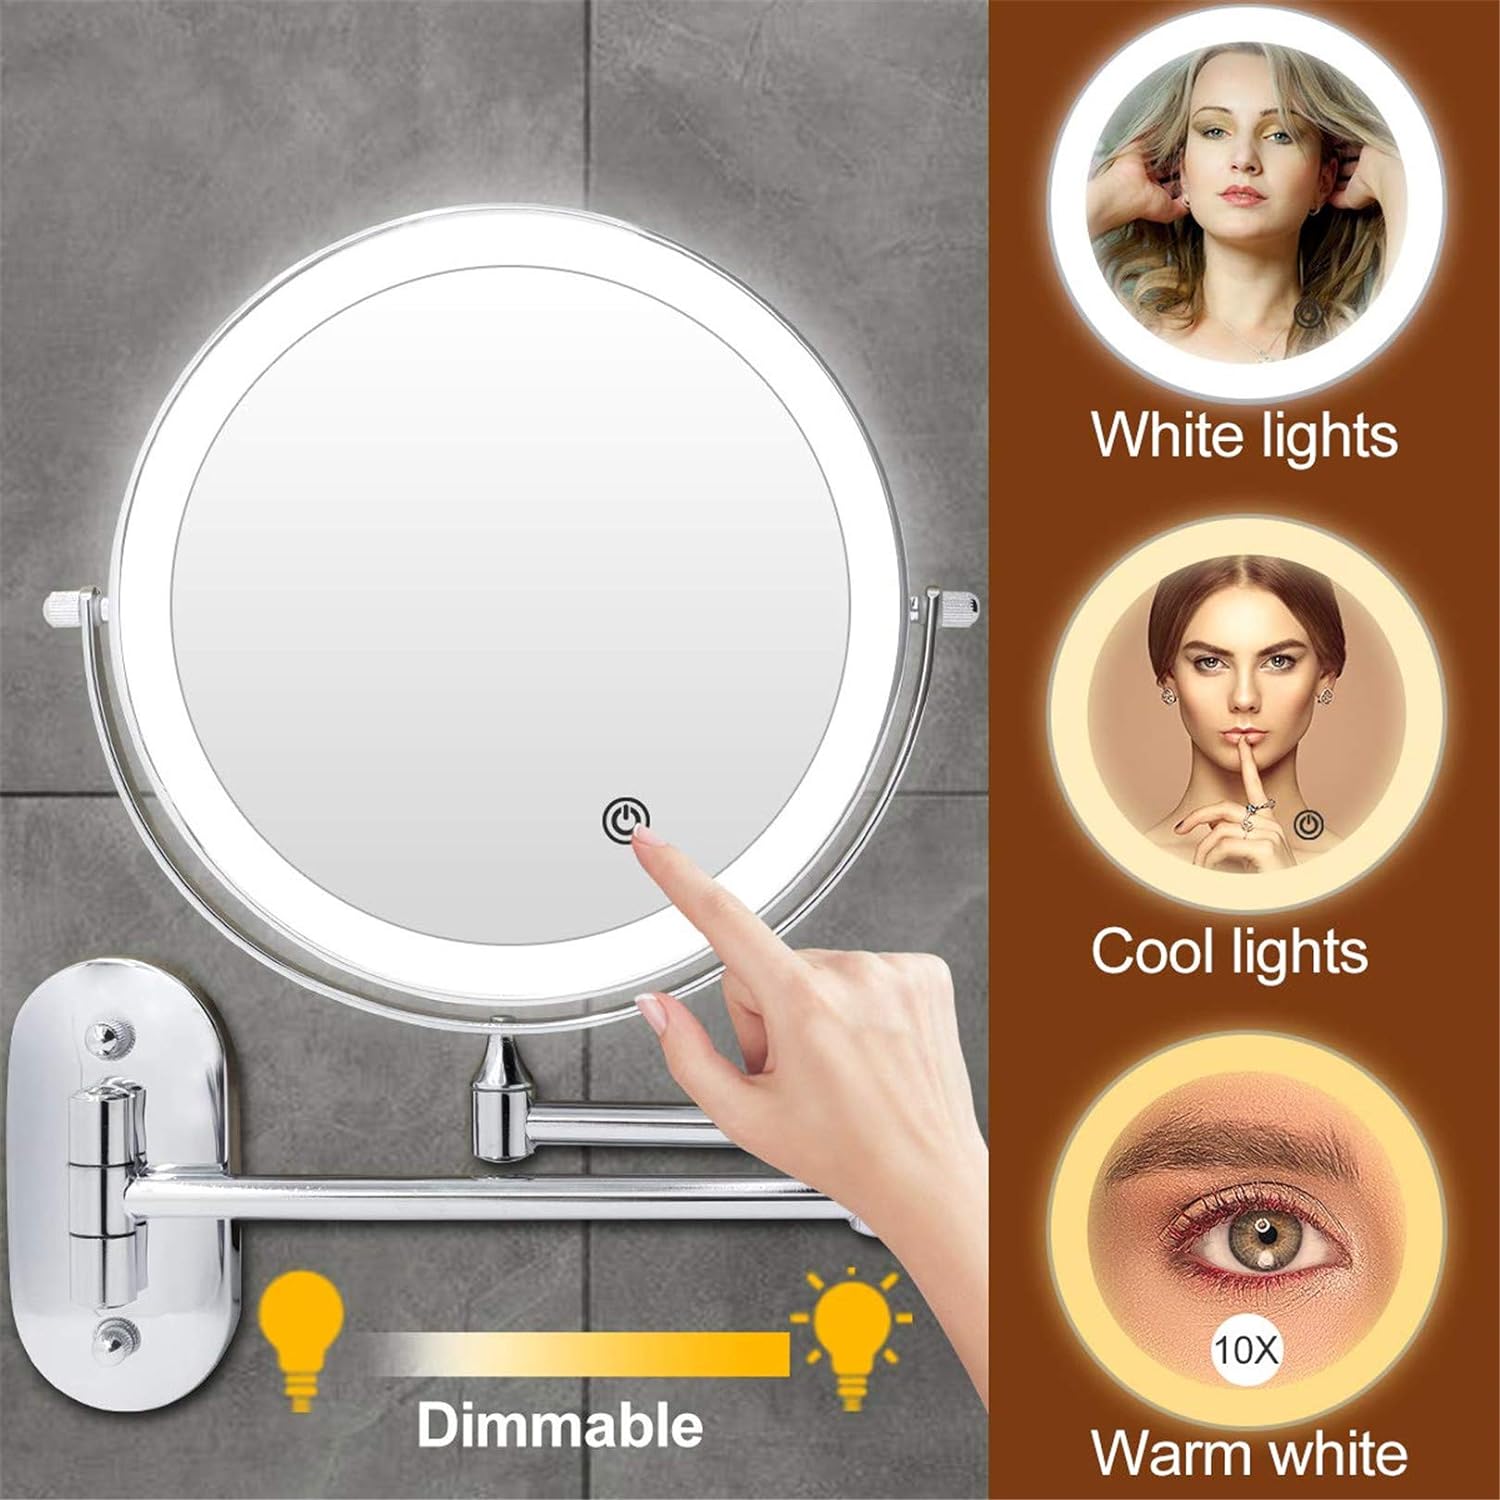 10x Magnifying Makeup Mirror, Magnifying Makeup Mirror With Lights Wall Mounted